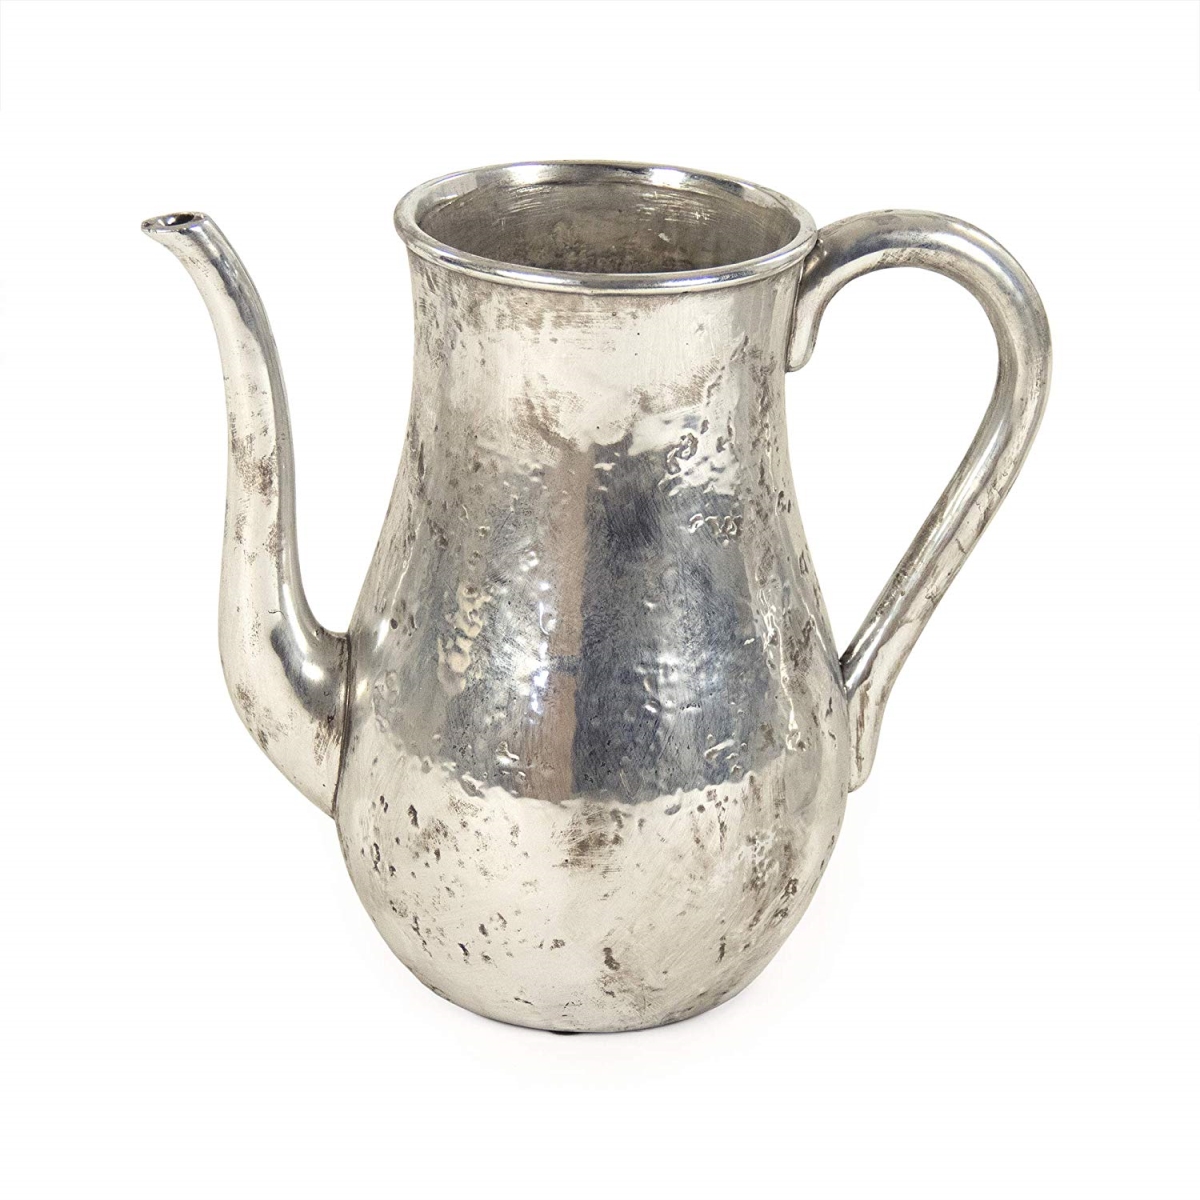 9824l A840 Distressed Metallic Pitcher, Large - Silver